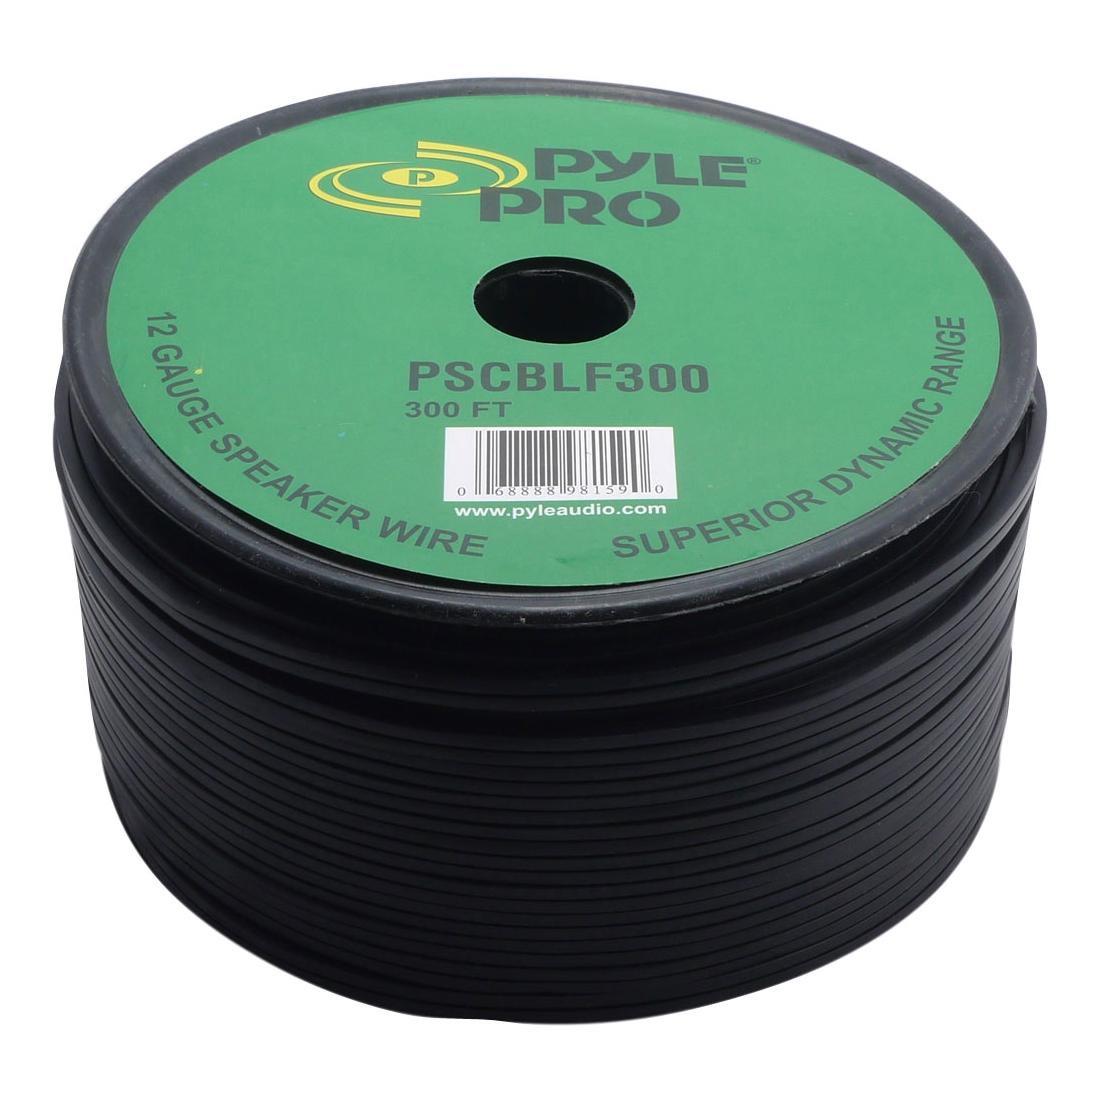 PYLE PSCBLF300 - 300Ft 12 AWG Spool Speaker cable With Rubber Jacket - image 2 of 2